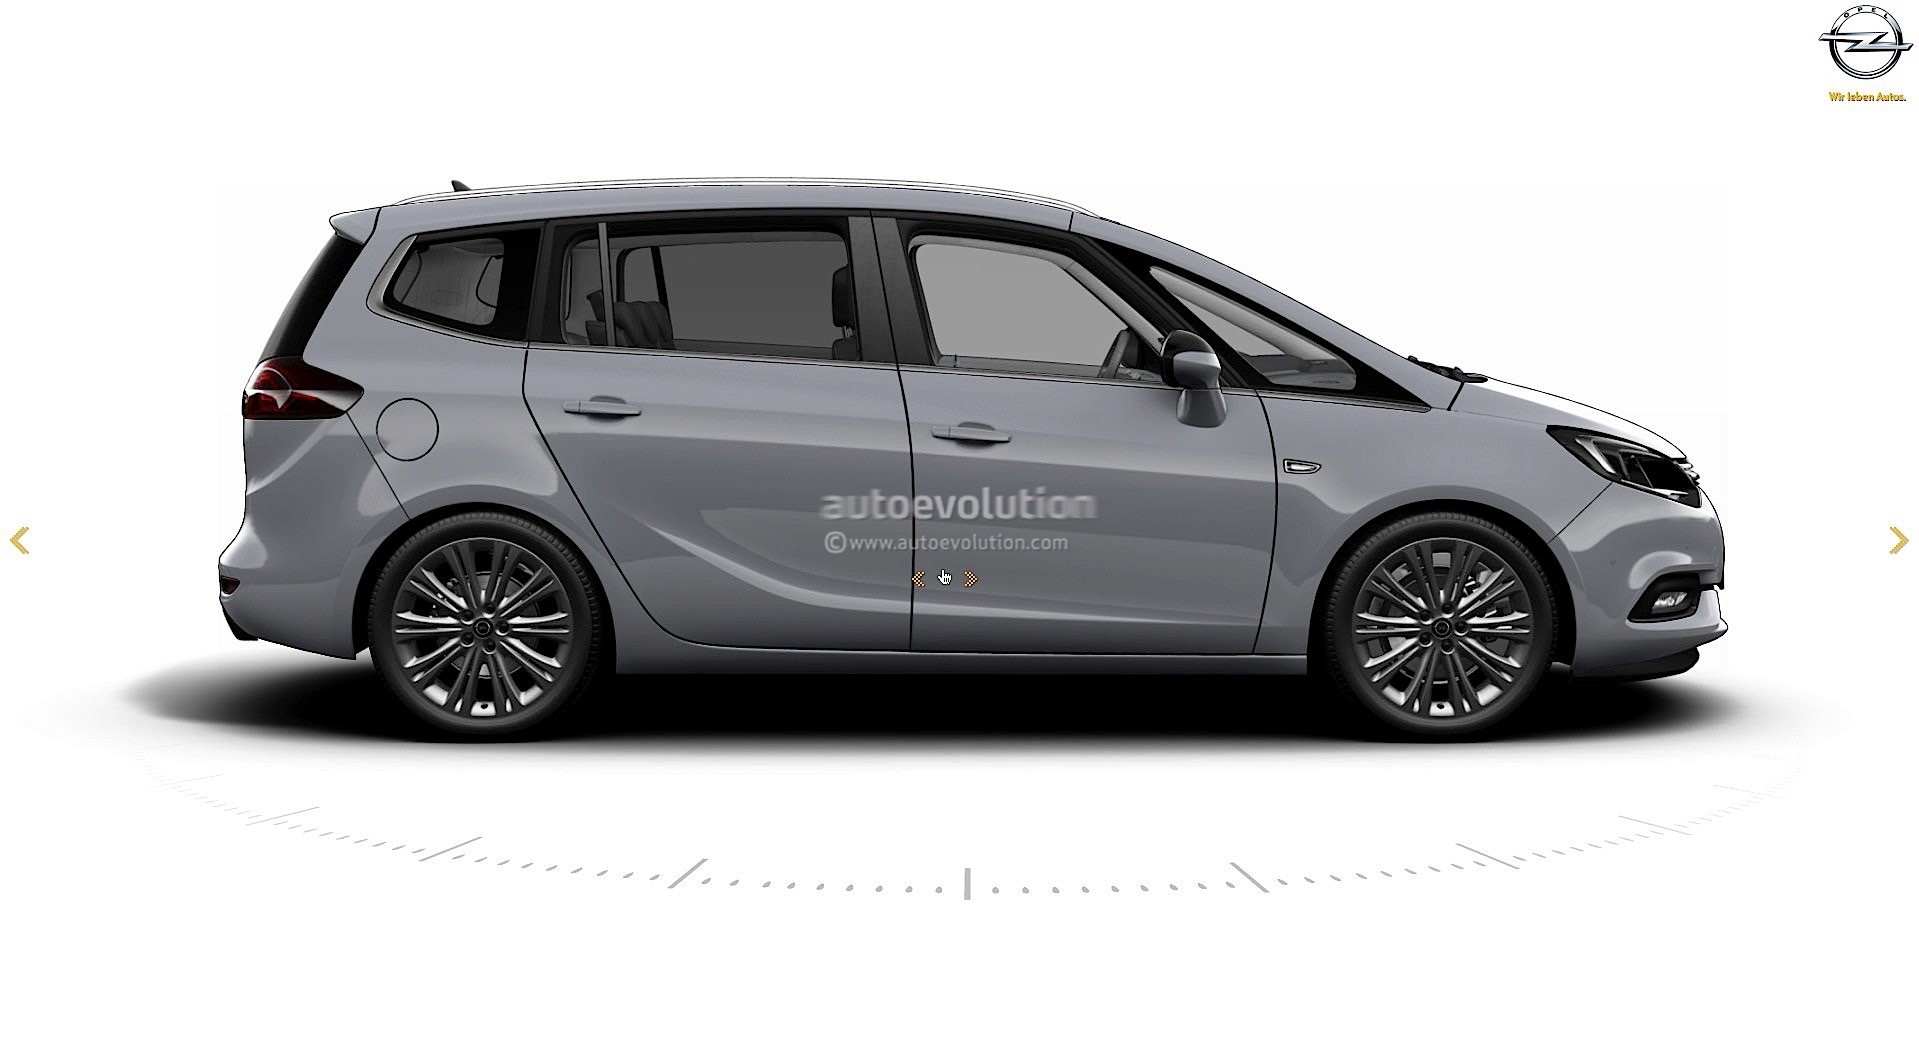 2017-opel-zafira-facelift-leaked-on-gm-website-here-are-the-first-pics_7-autonovosti.me-6